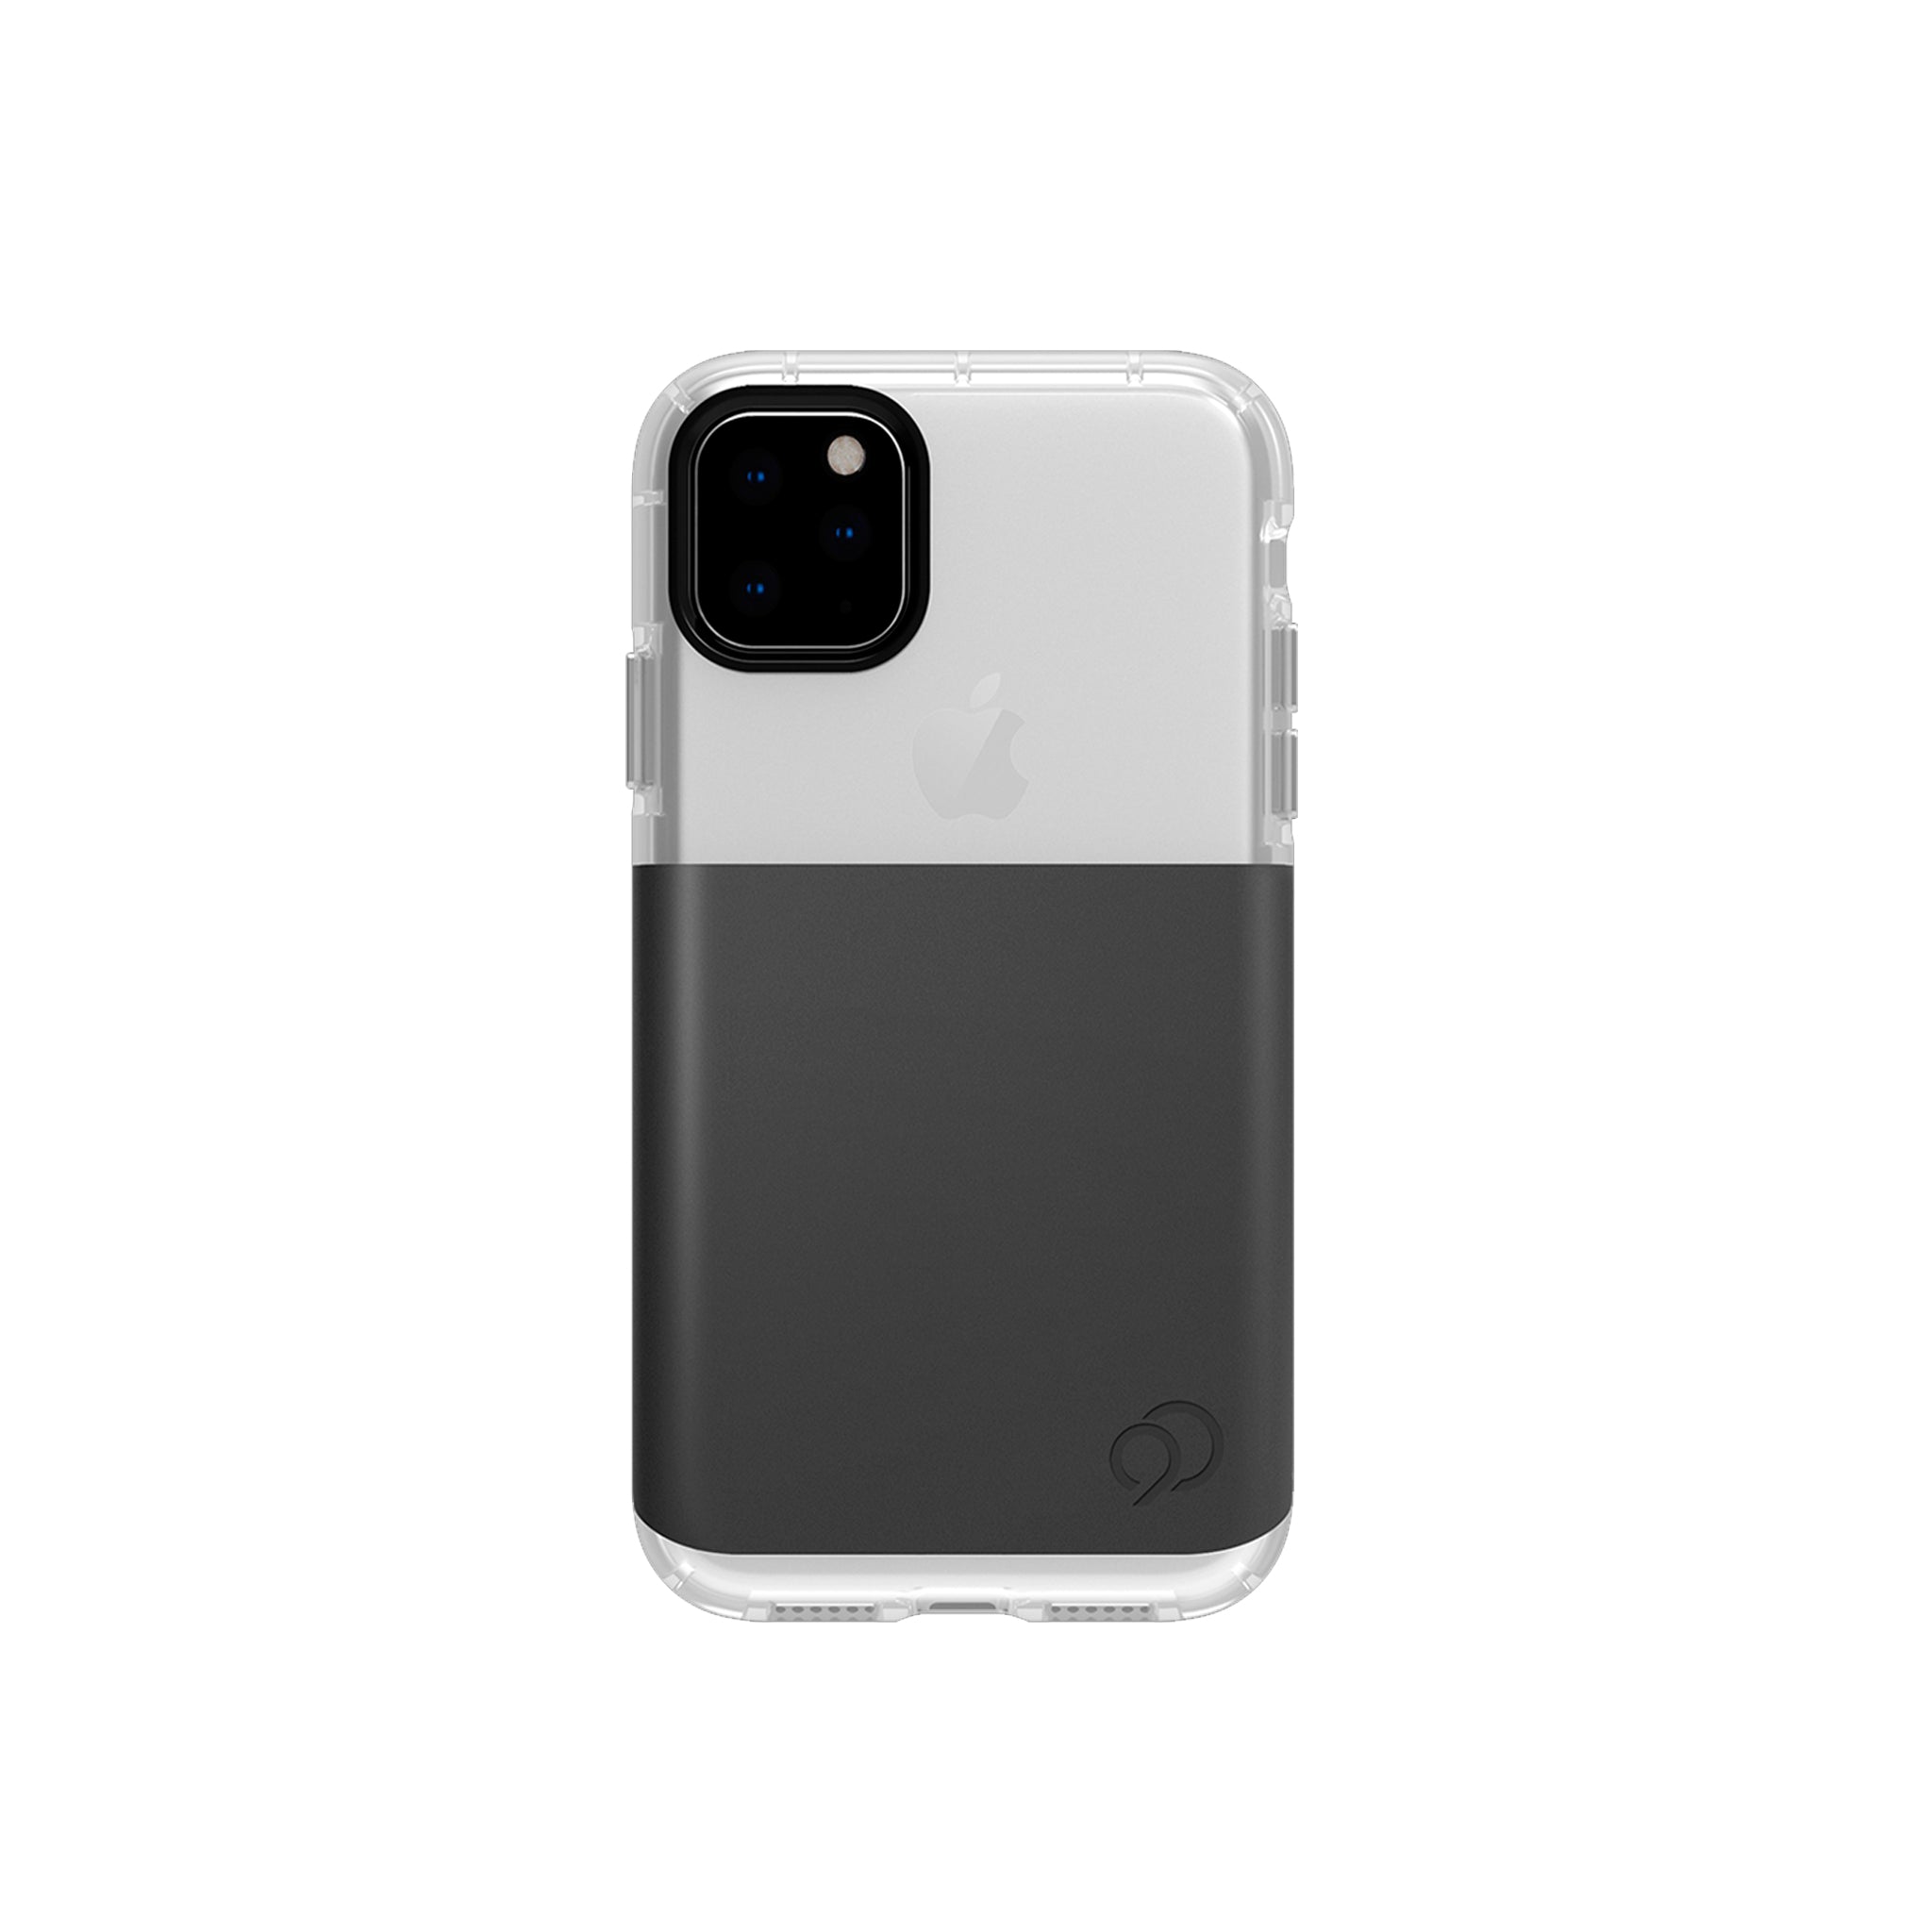 Nimbus9 - Ghost 2 Pro Case With Mount For Apple Iphone 11 Pro Max / Xs Max - Gunmetal Gray And Pure White